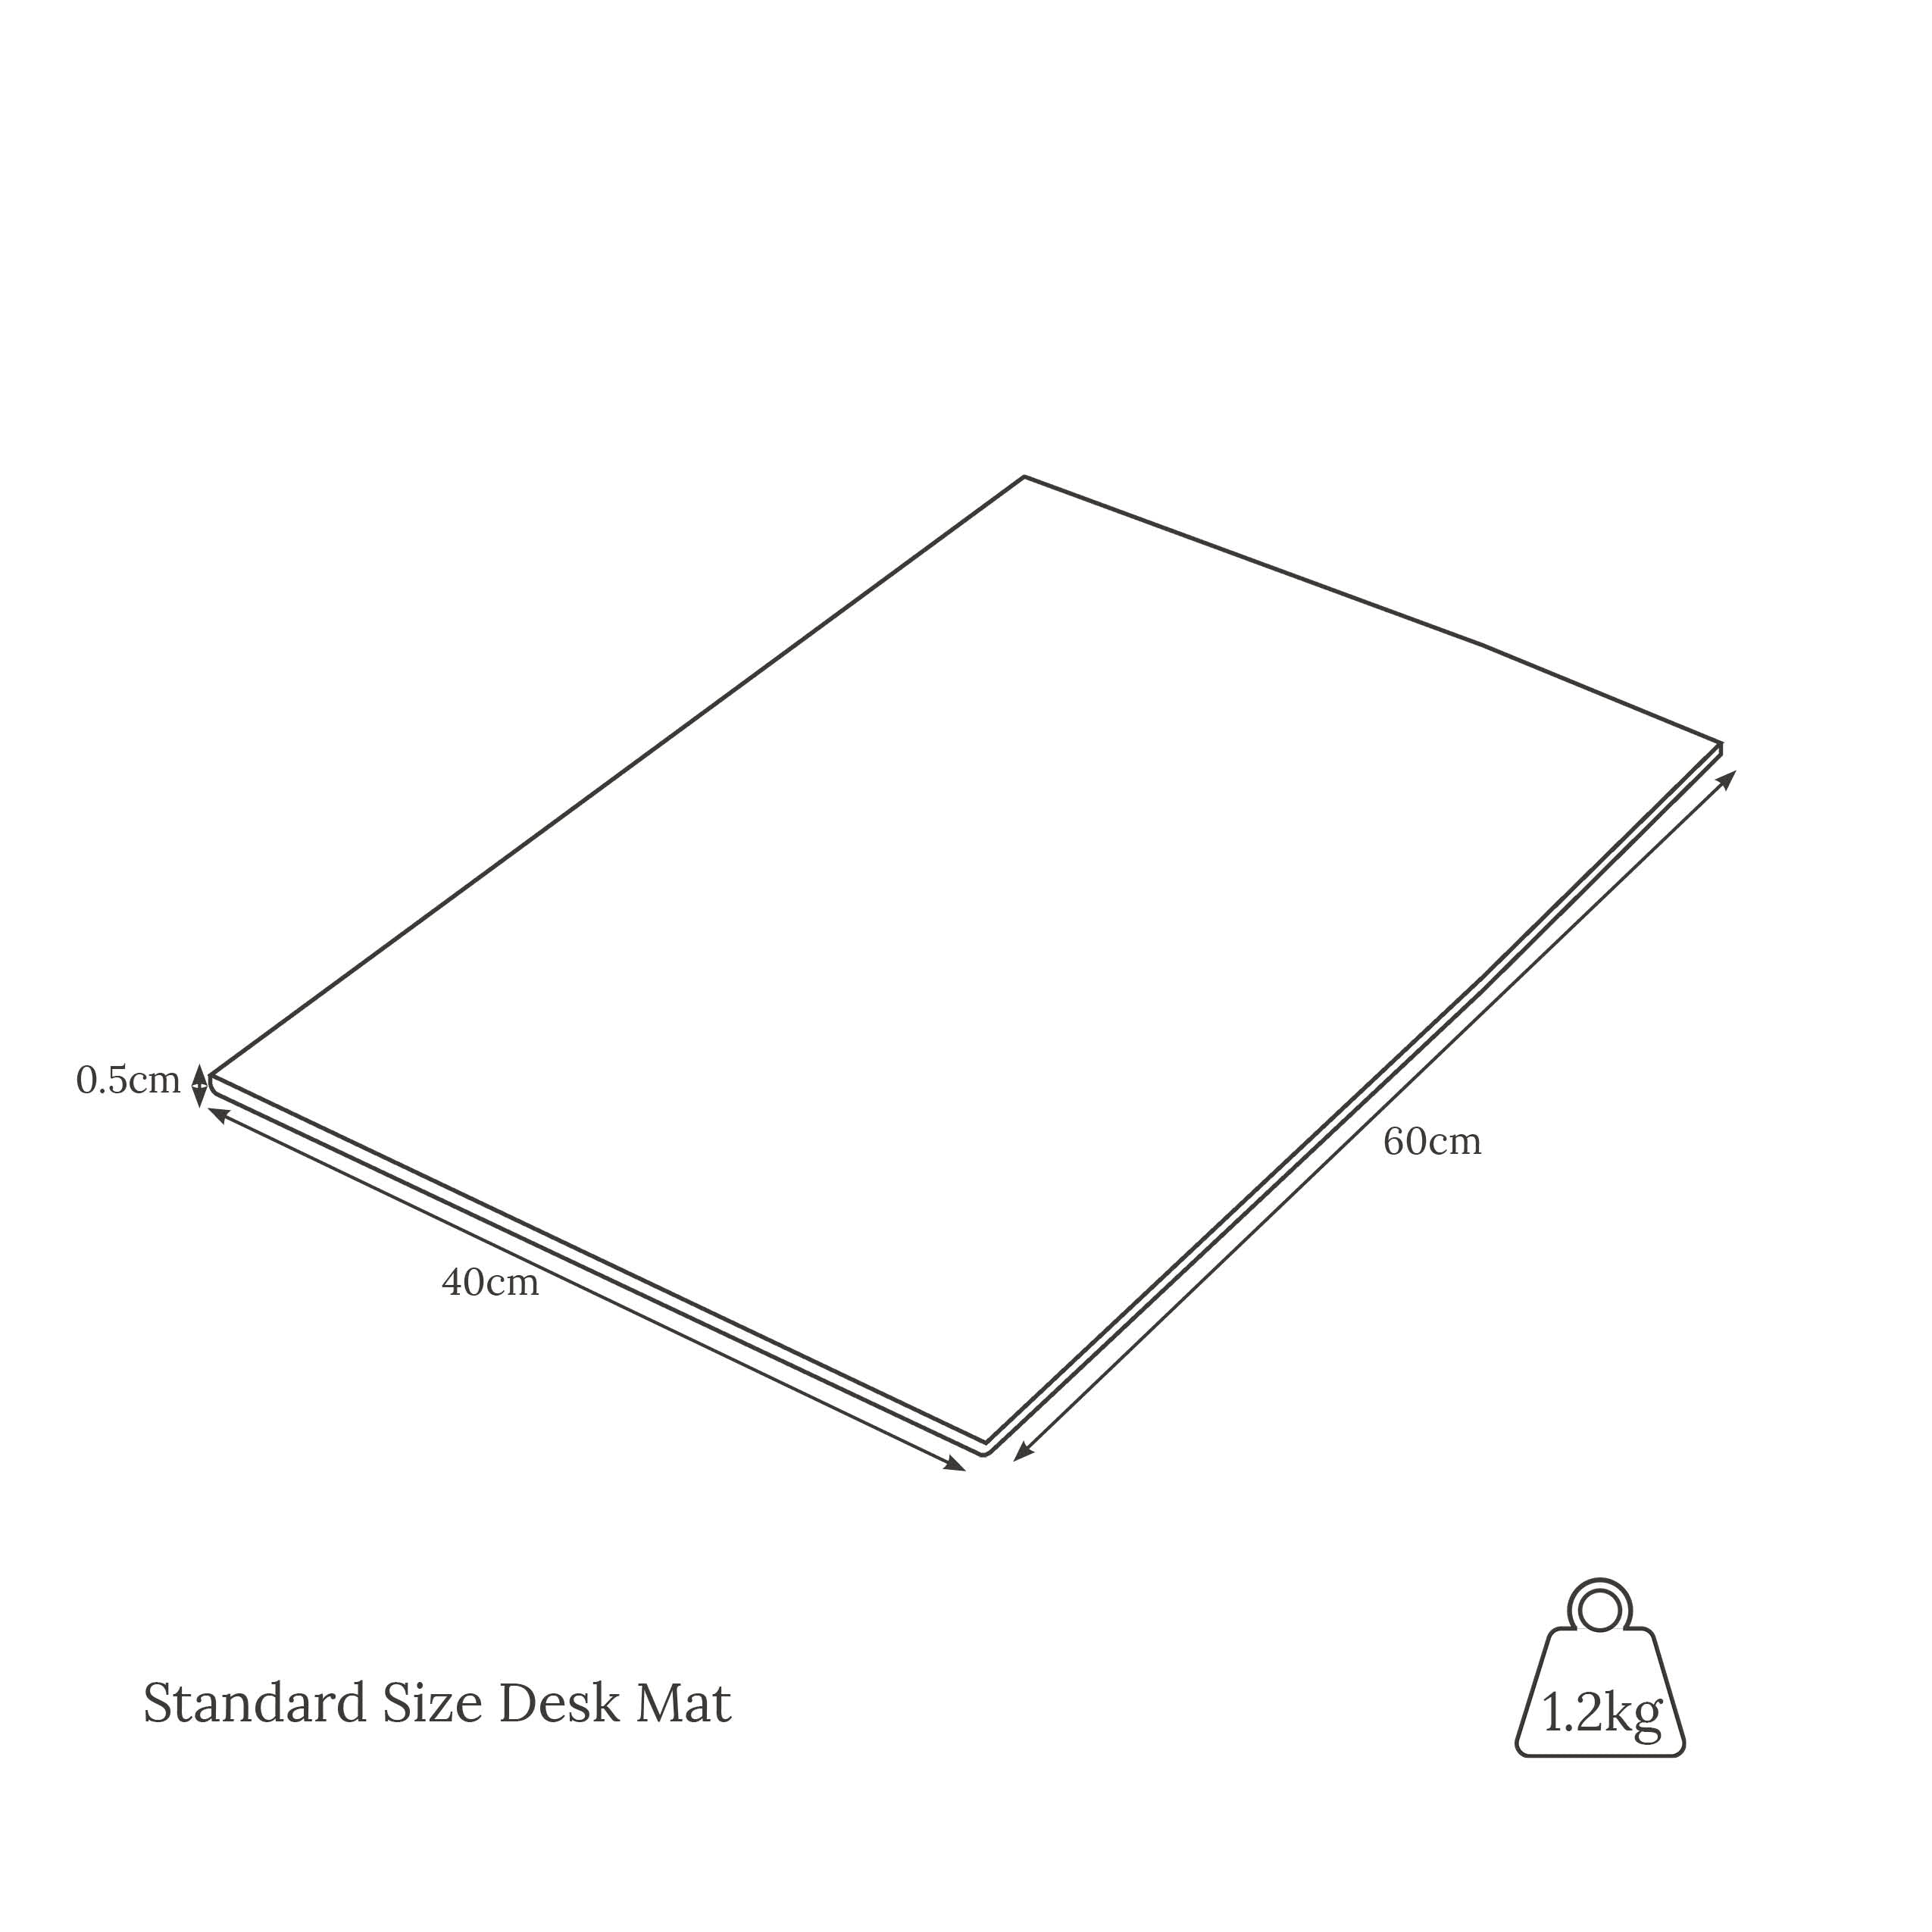 Standard size desk mat weight and dimensions